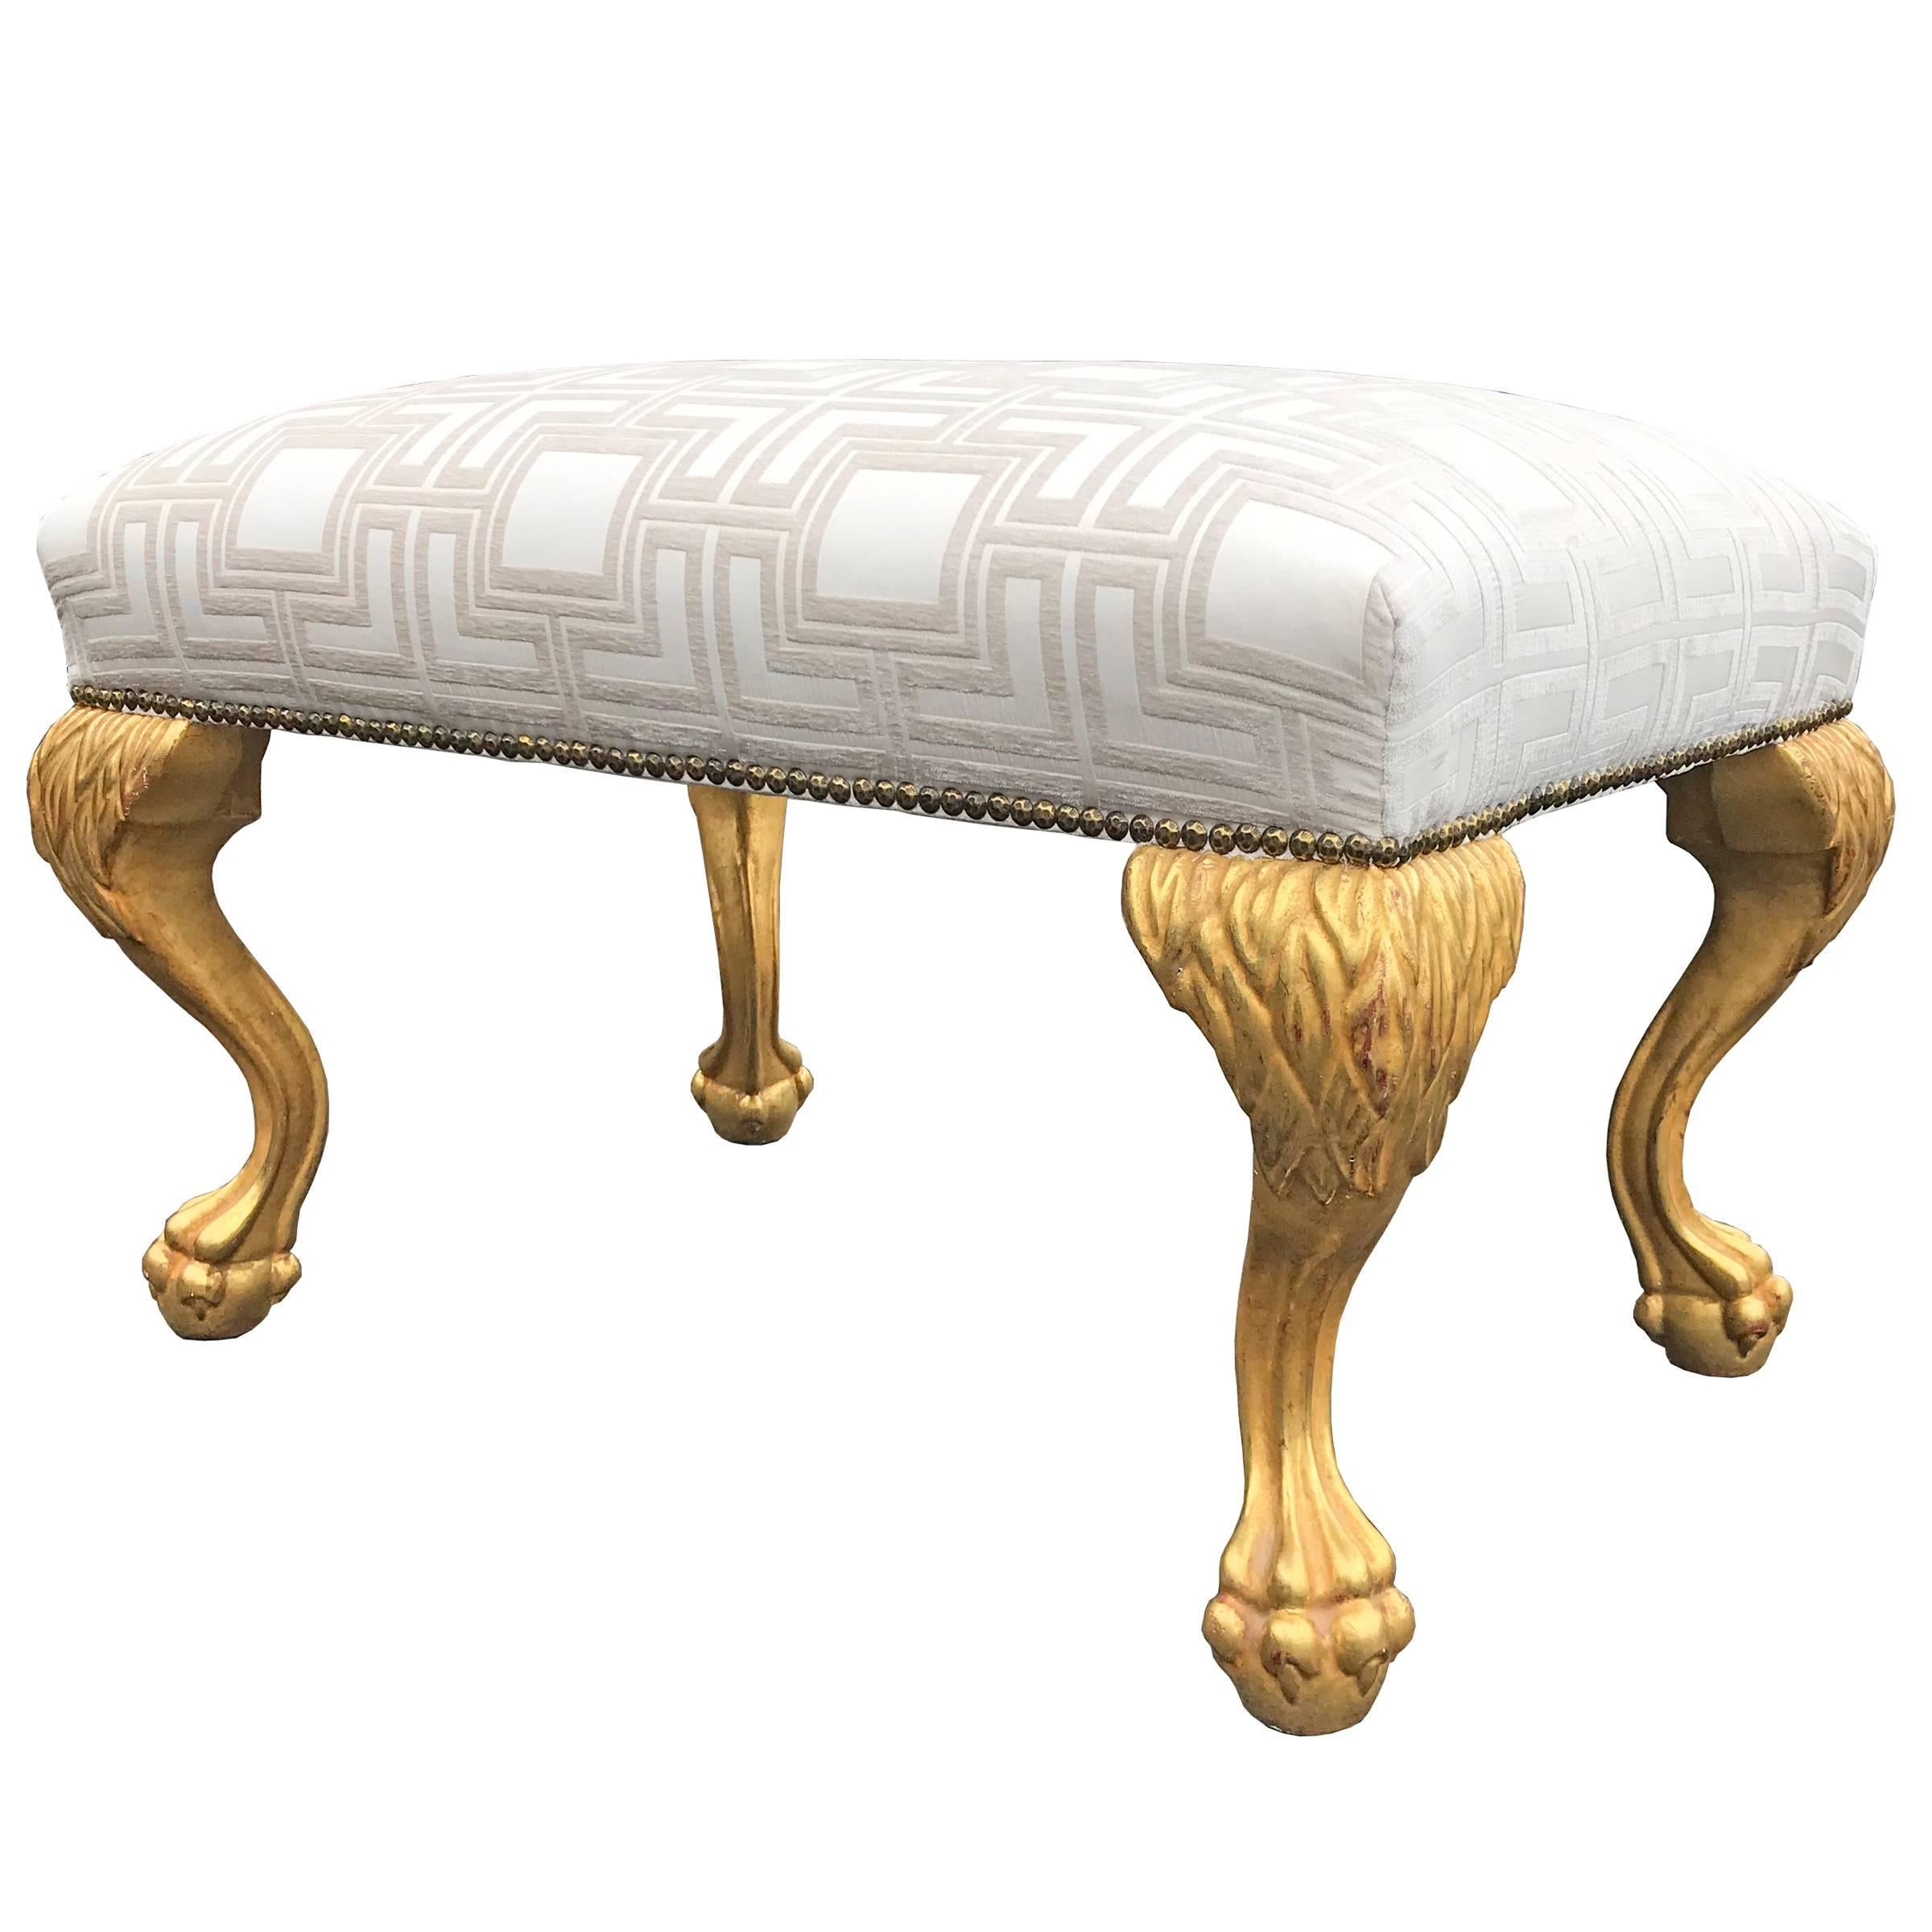 A 21st century American water giltwood upholstered bench with fantastic furry lion legs with paw and ball feet. The gilding is the done the correct way, with a red clay base and gold leaf applied with water on top. The upholstery is a geometric